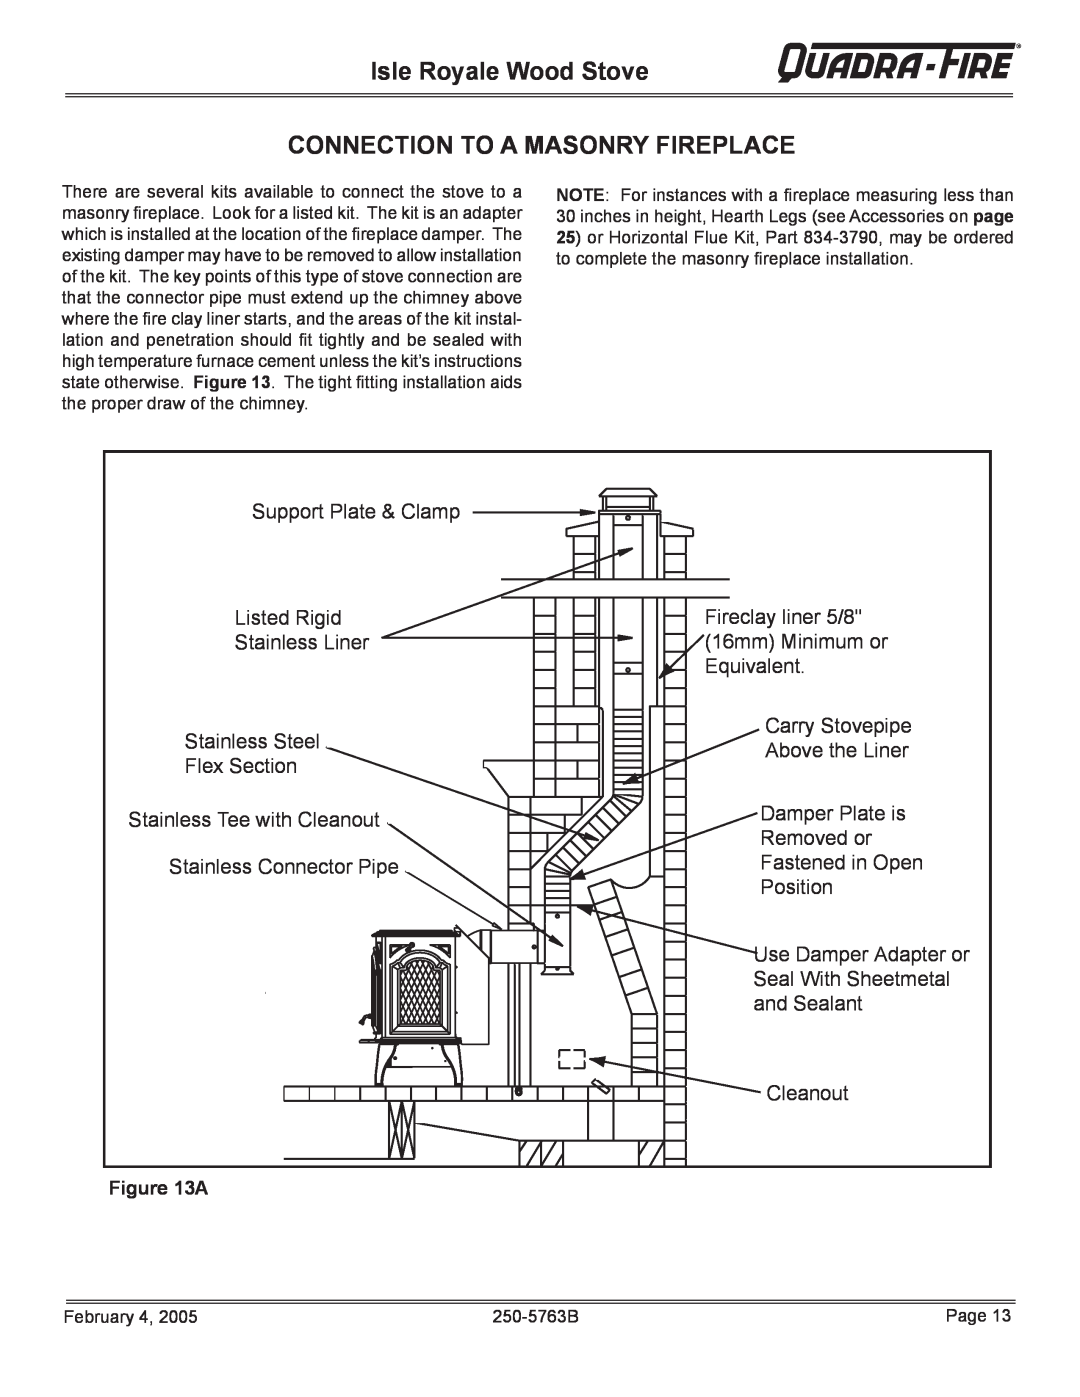 Quadra-Fire installation instructions Connection To A Masonry Fireplace, Isle Royale Wood Stove 